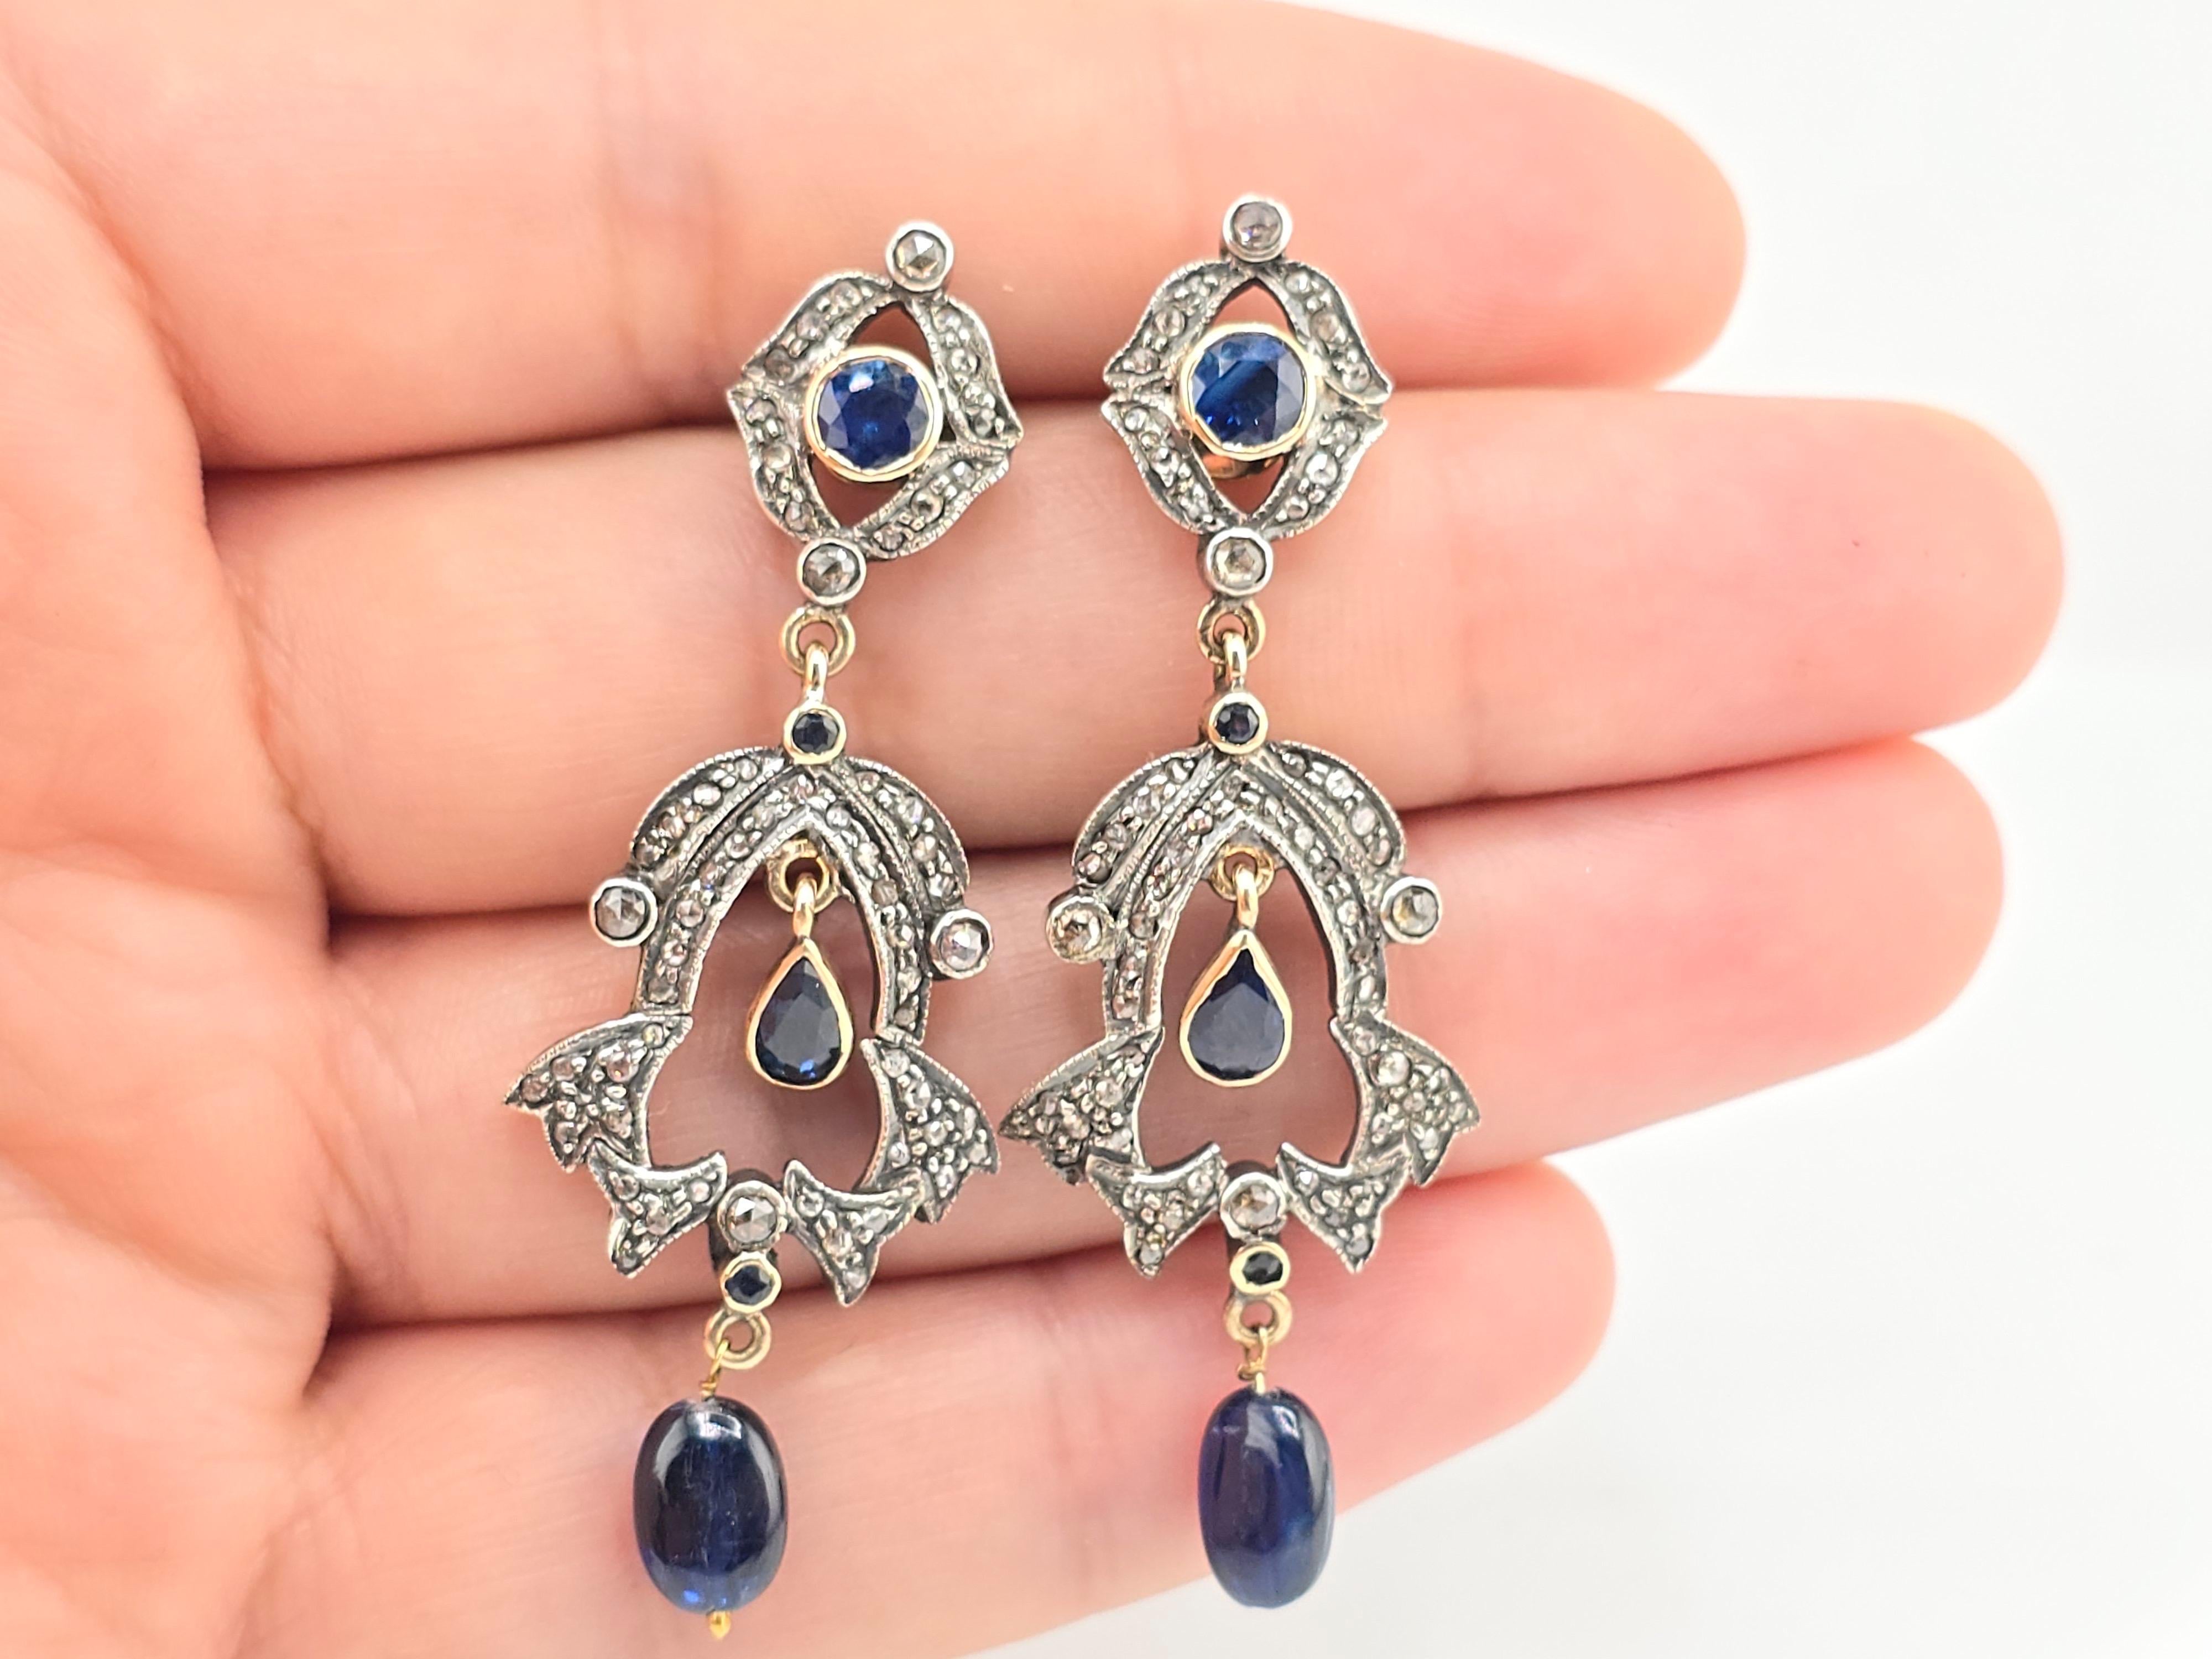 Rare Pair Of Victorian Diamond & Sapphire Earrings 14K & Sterling In Good Condition For Sale In Media, PA